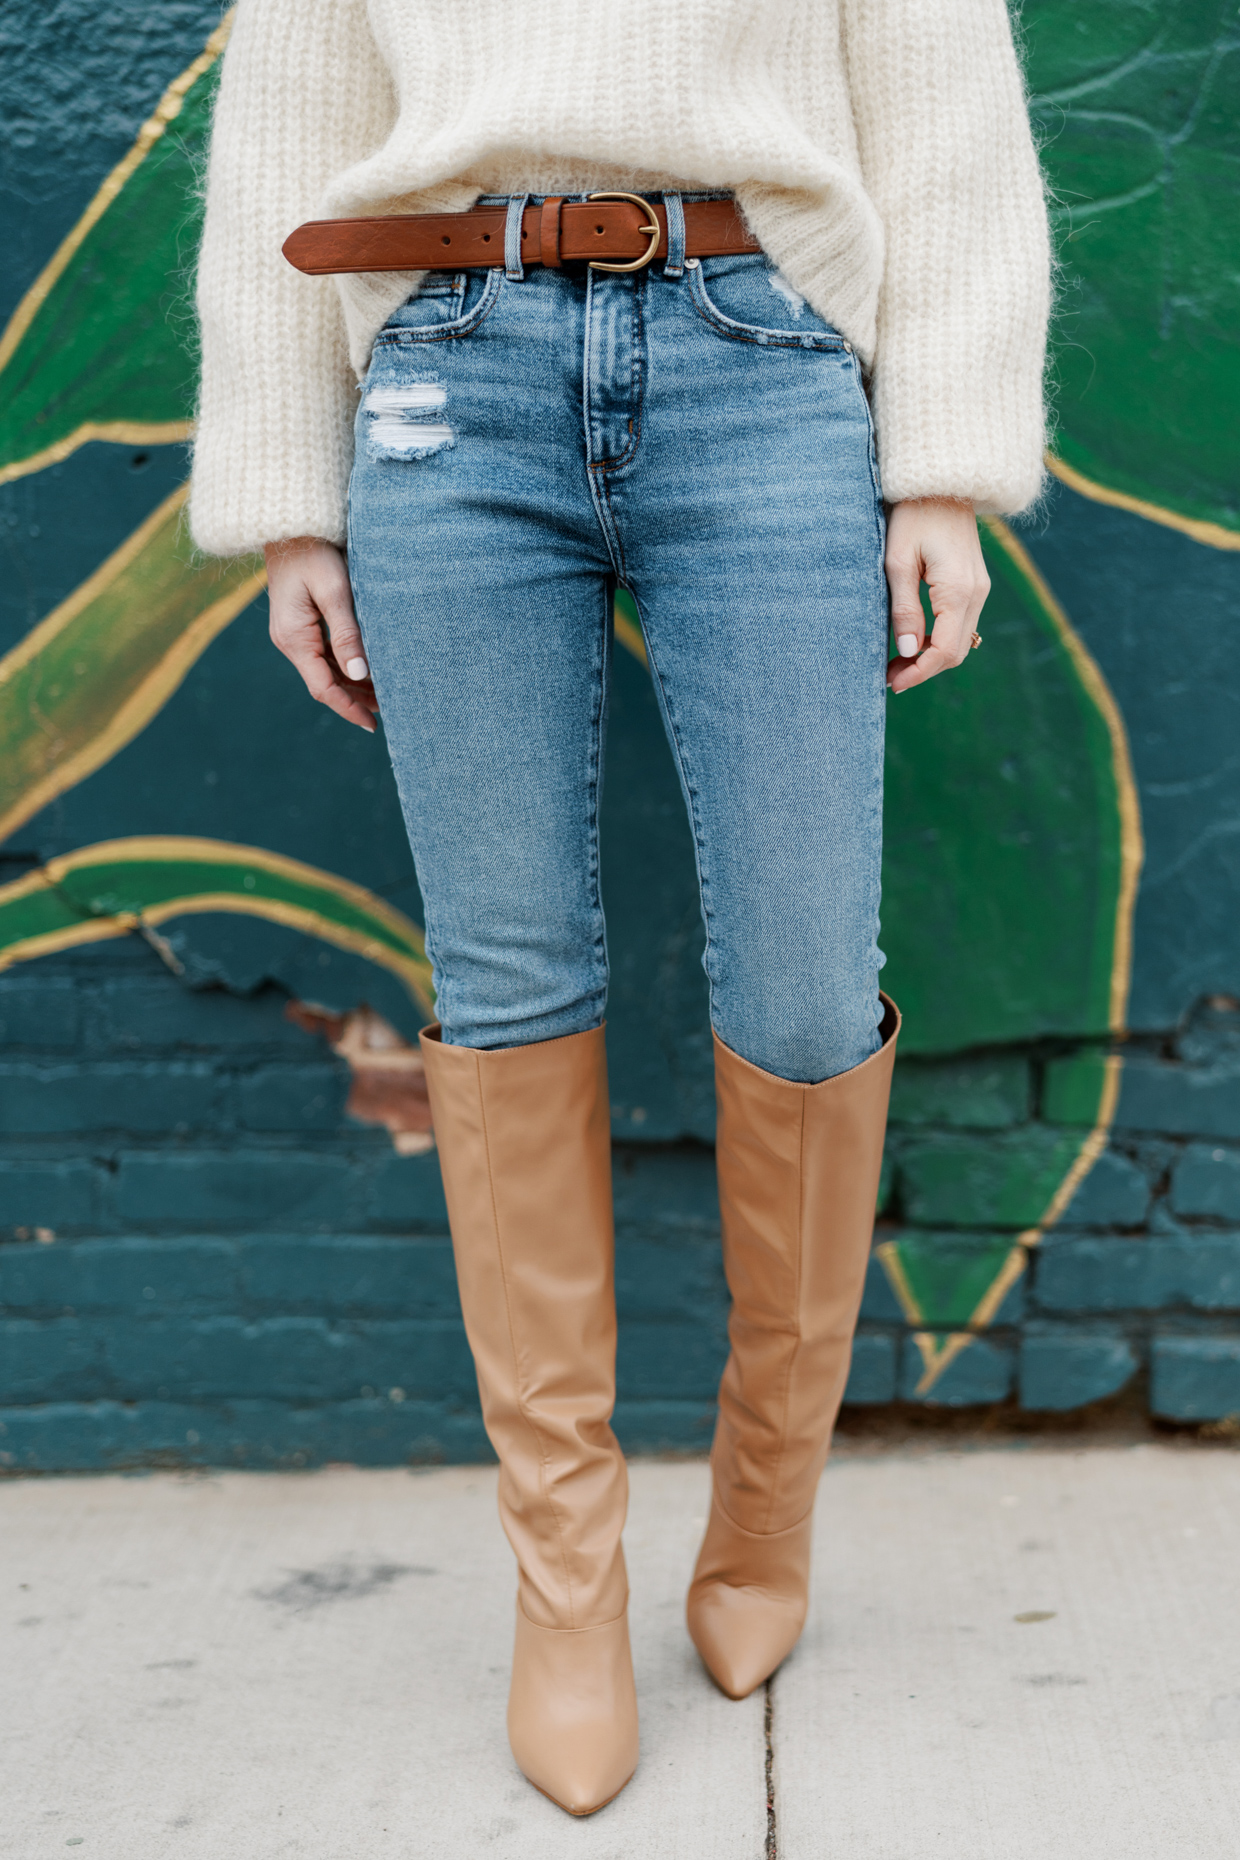 Knee-high boots with your favorite straight-leg jeans